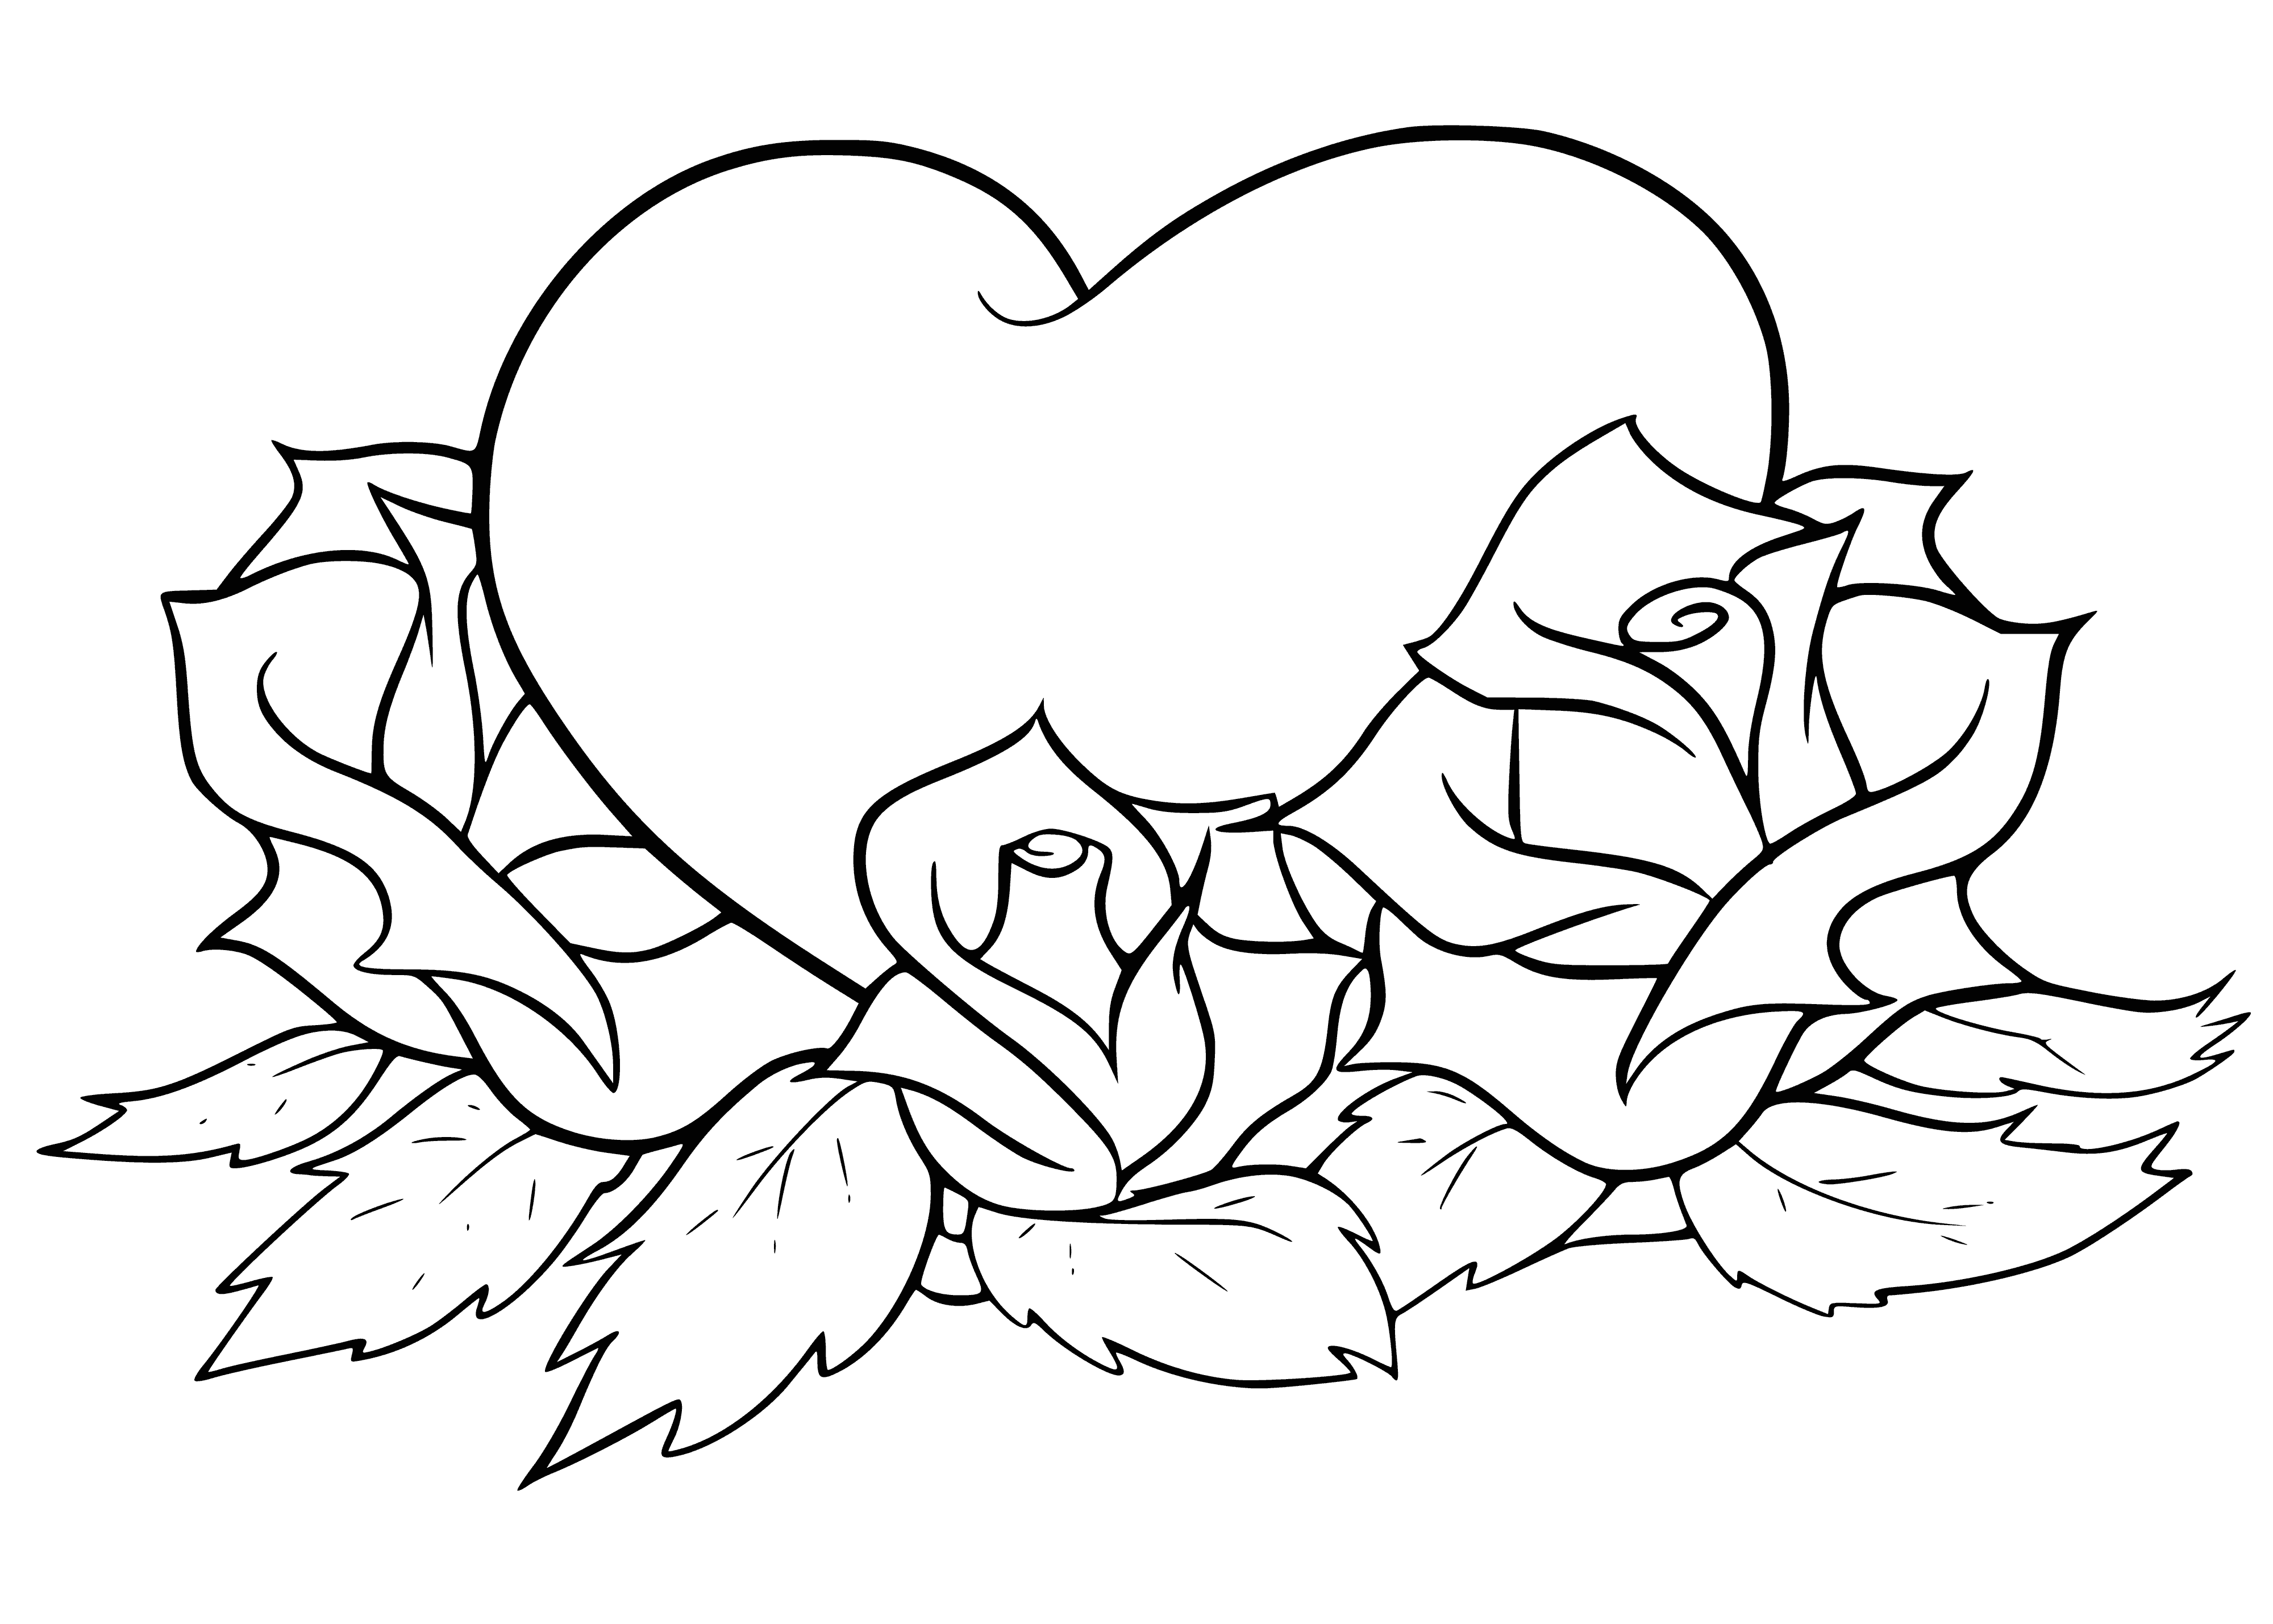 coloring page: 12 red roses in heart formation surrounded by leaves, baby's breath; long, thin stems.